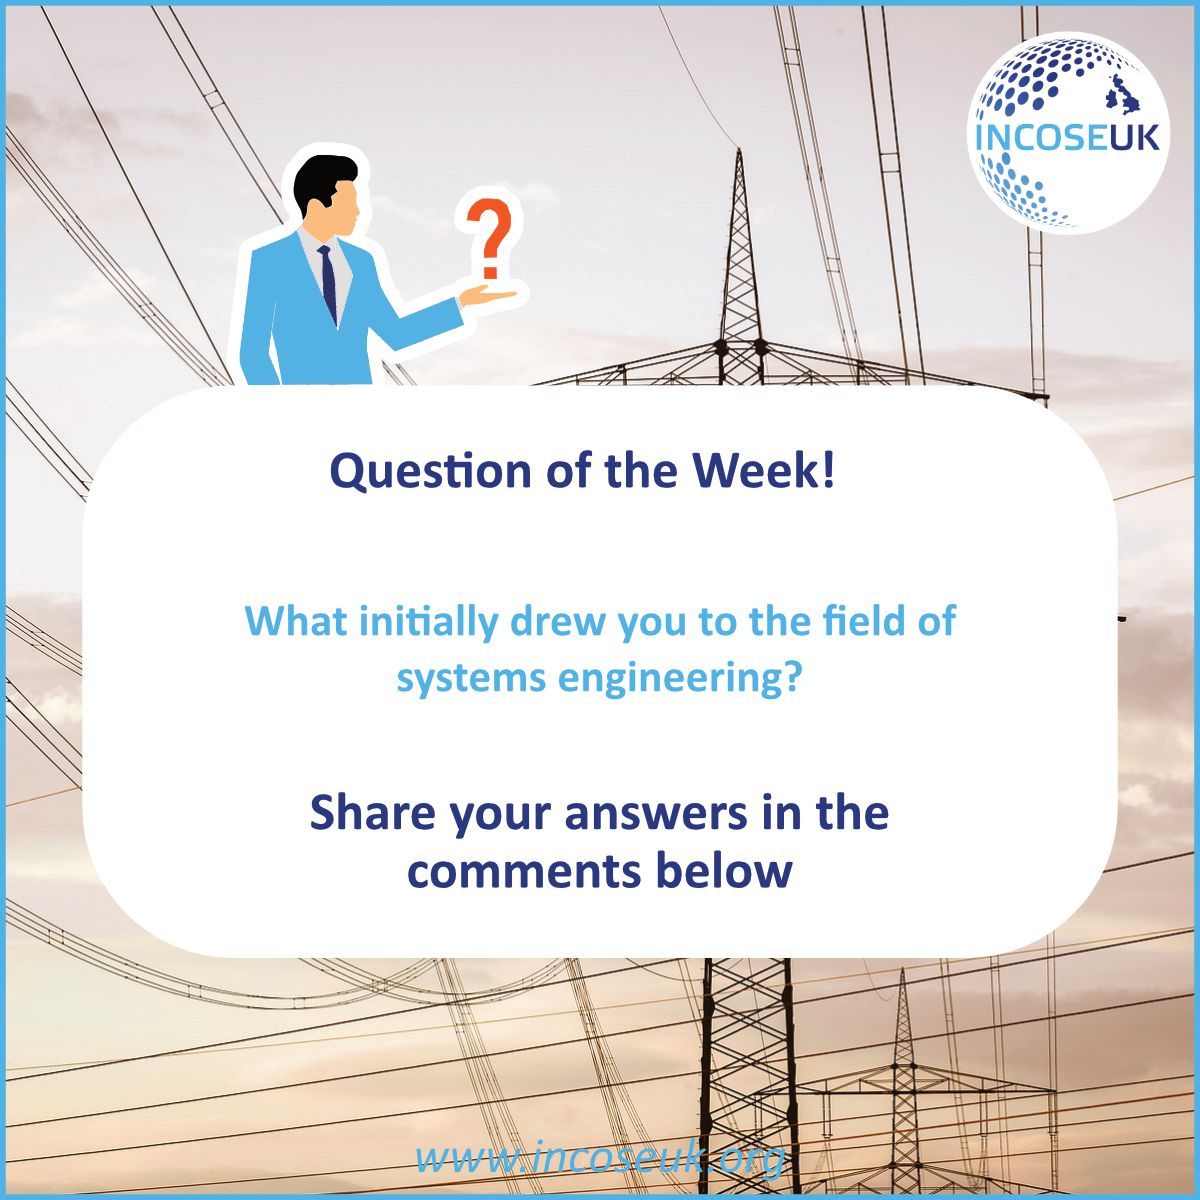 Question of the Week 💡 
What initially drew you to the field of systems engineering?

Share your thoughts and tips in the comments. Let's learn from each other's experiences!

#SystemsEngineering #Engineering #ComplexEngineering